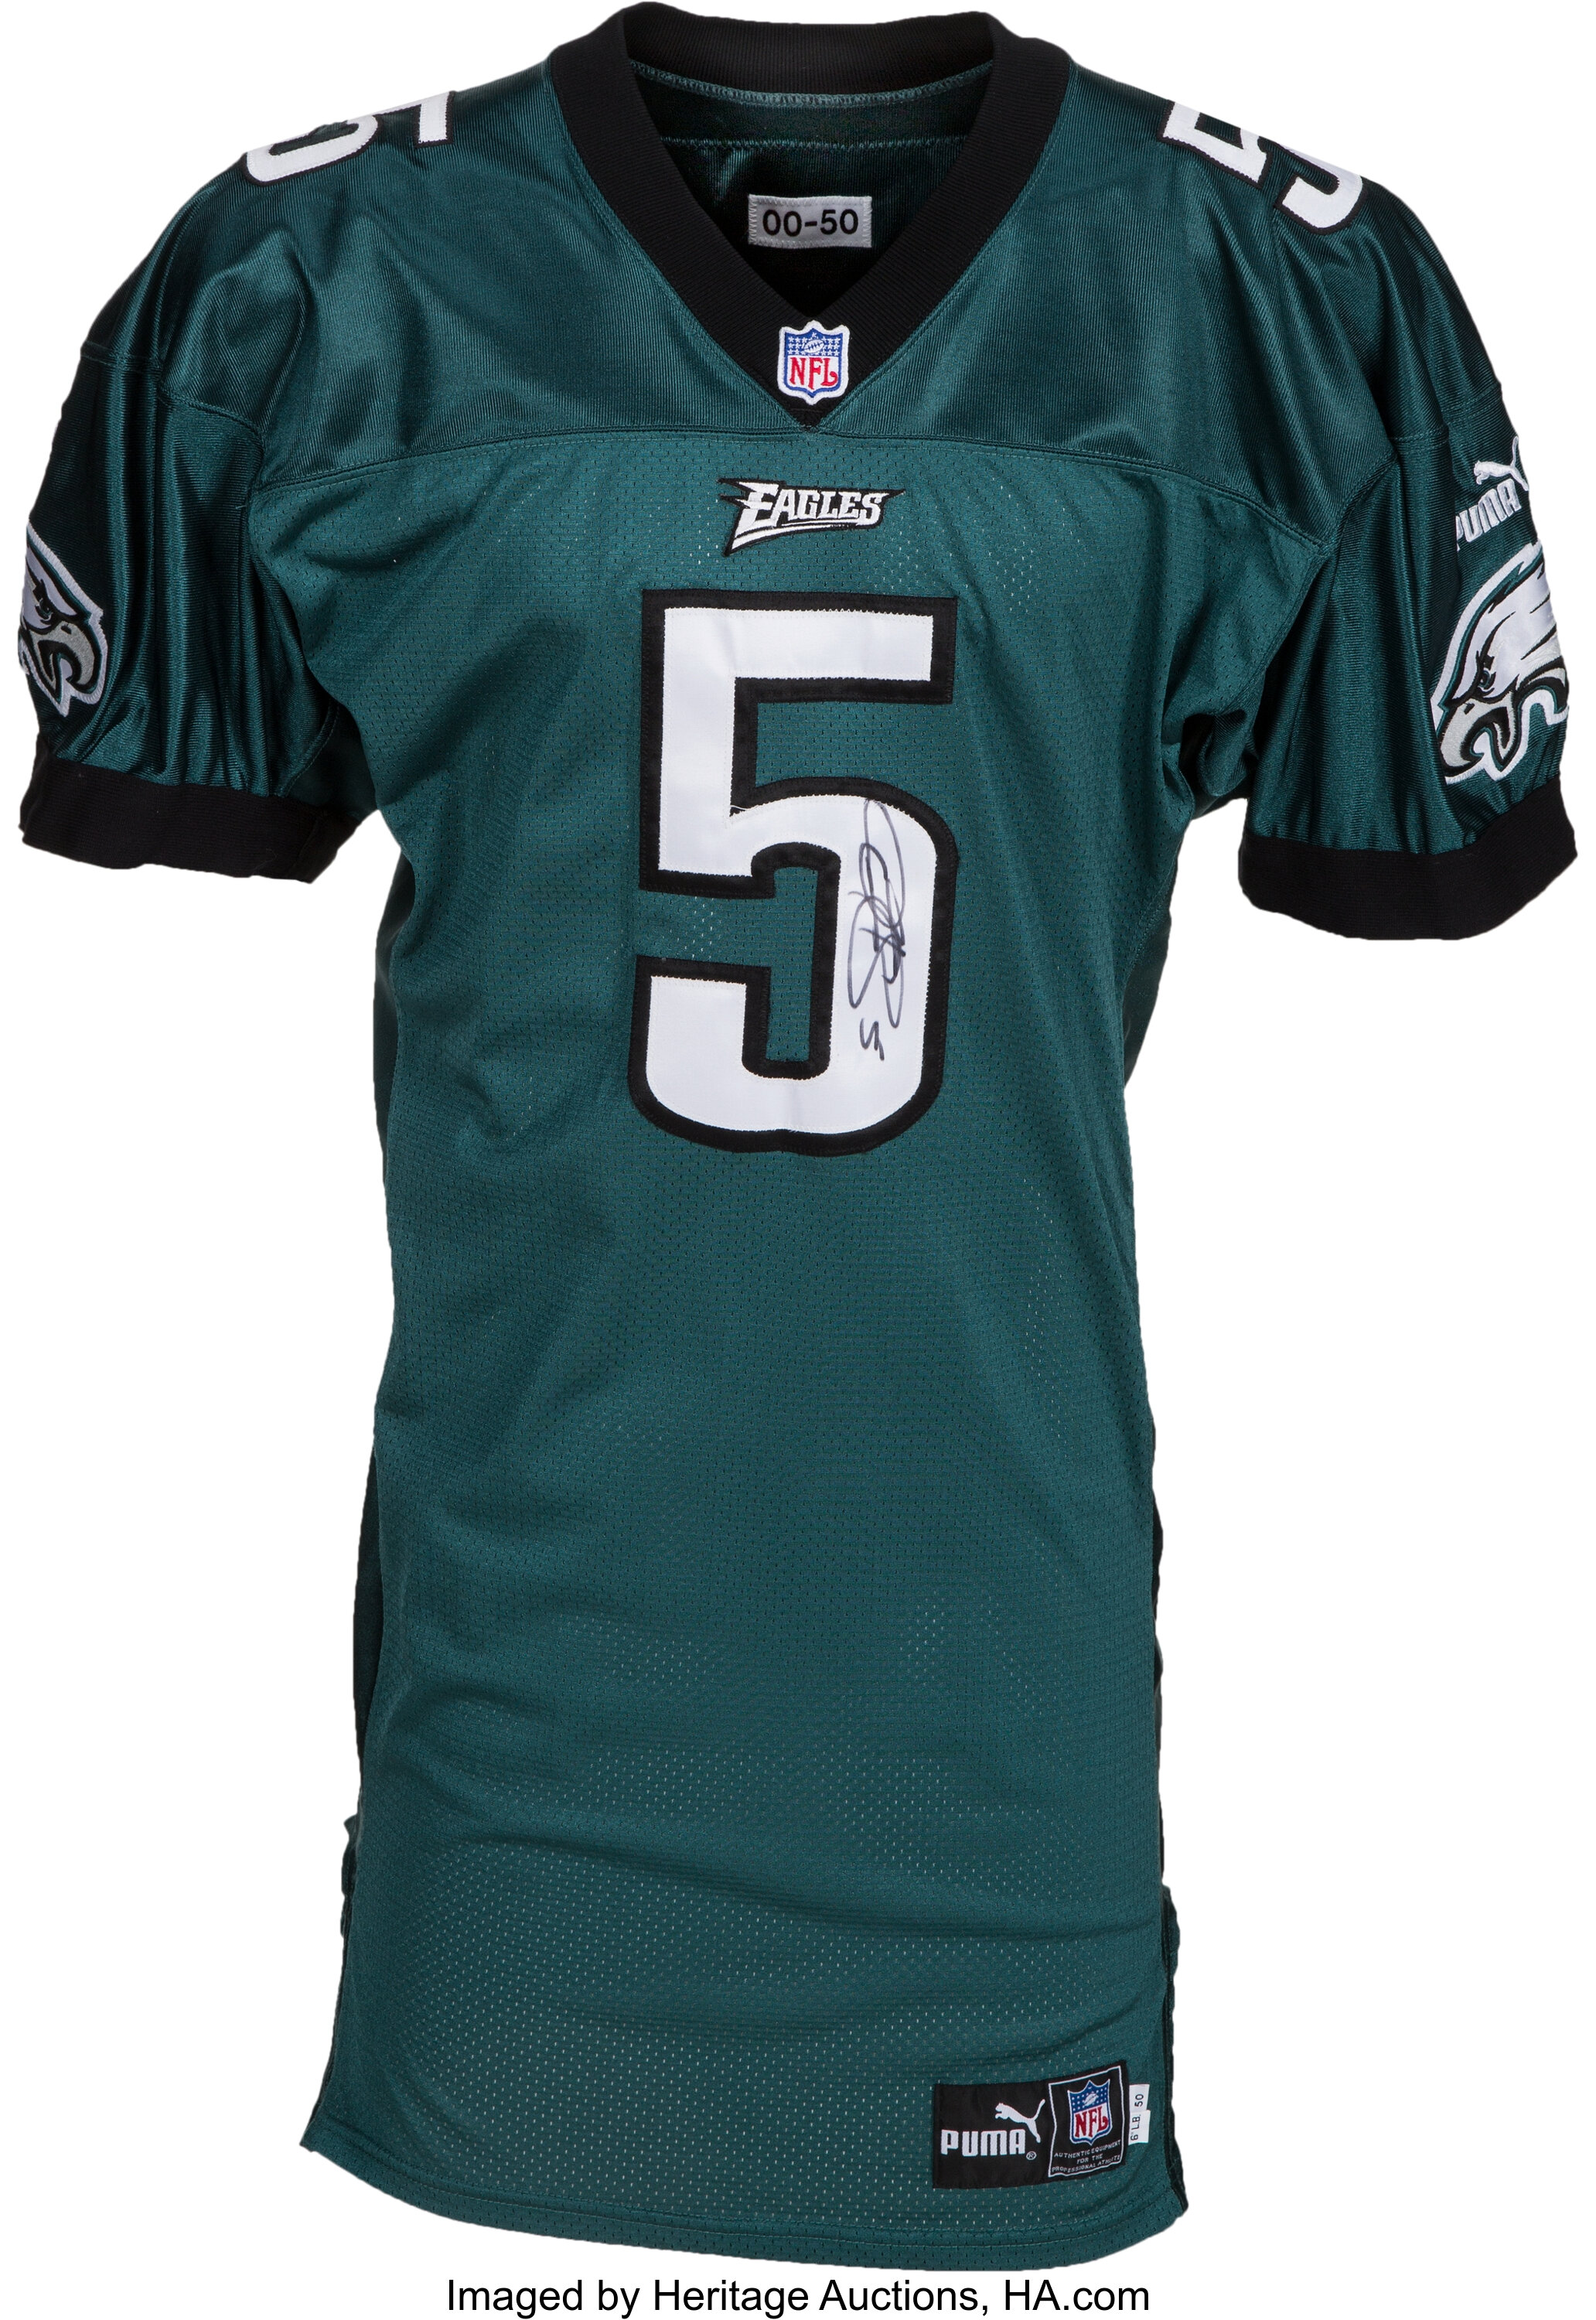 The Top 5 Philadelphia Eagles Jerseys of All Time